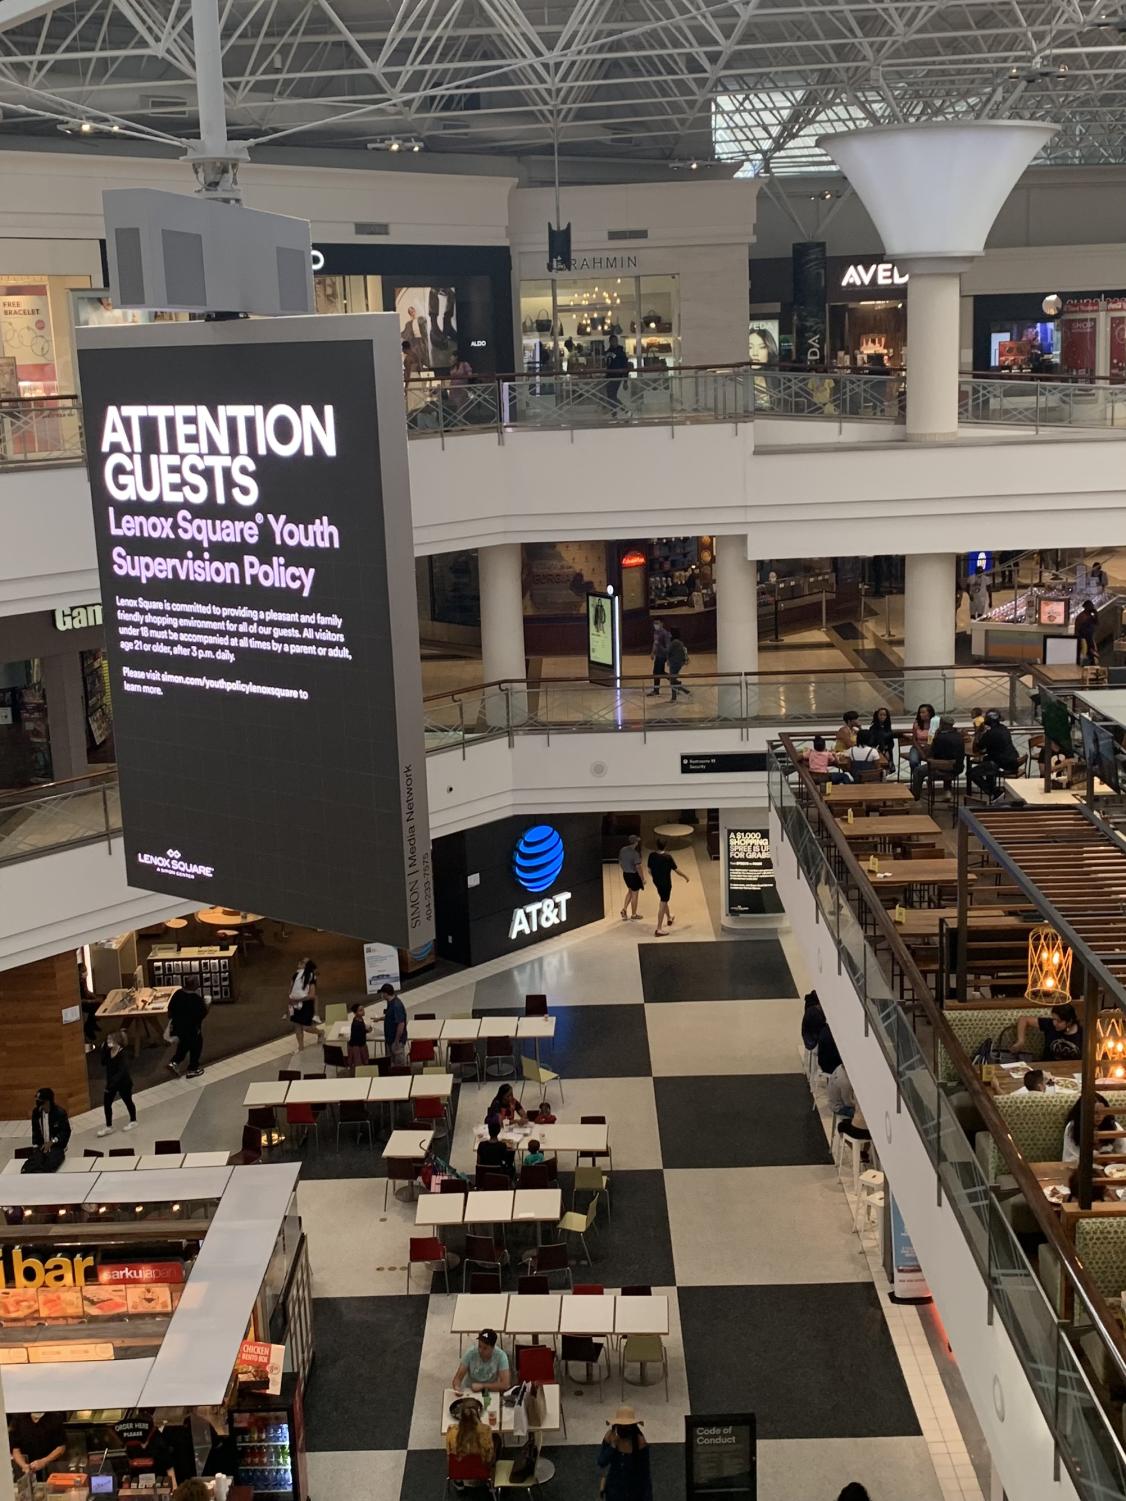 Lenox Square Employee: 'We're Still A Long Way From Normal